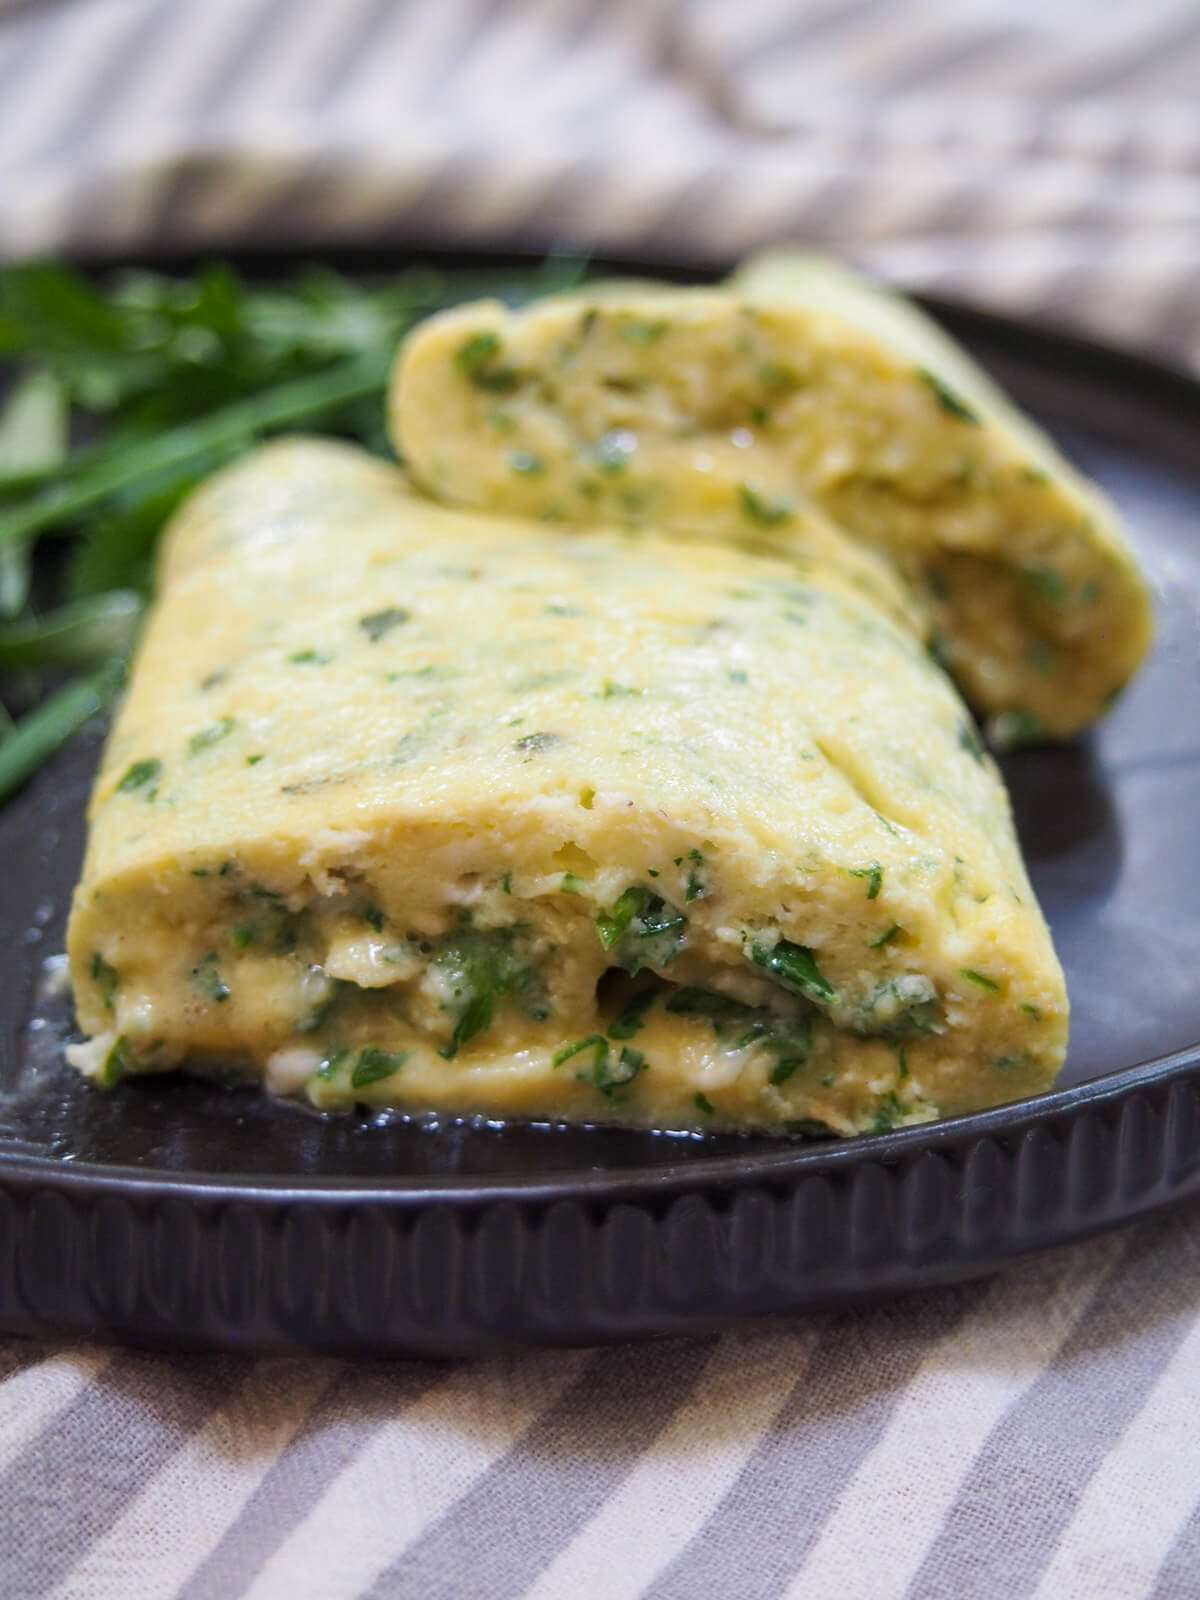 cut open French omelette with herbs from side showing soft inside